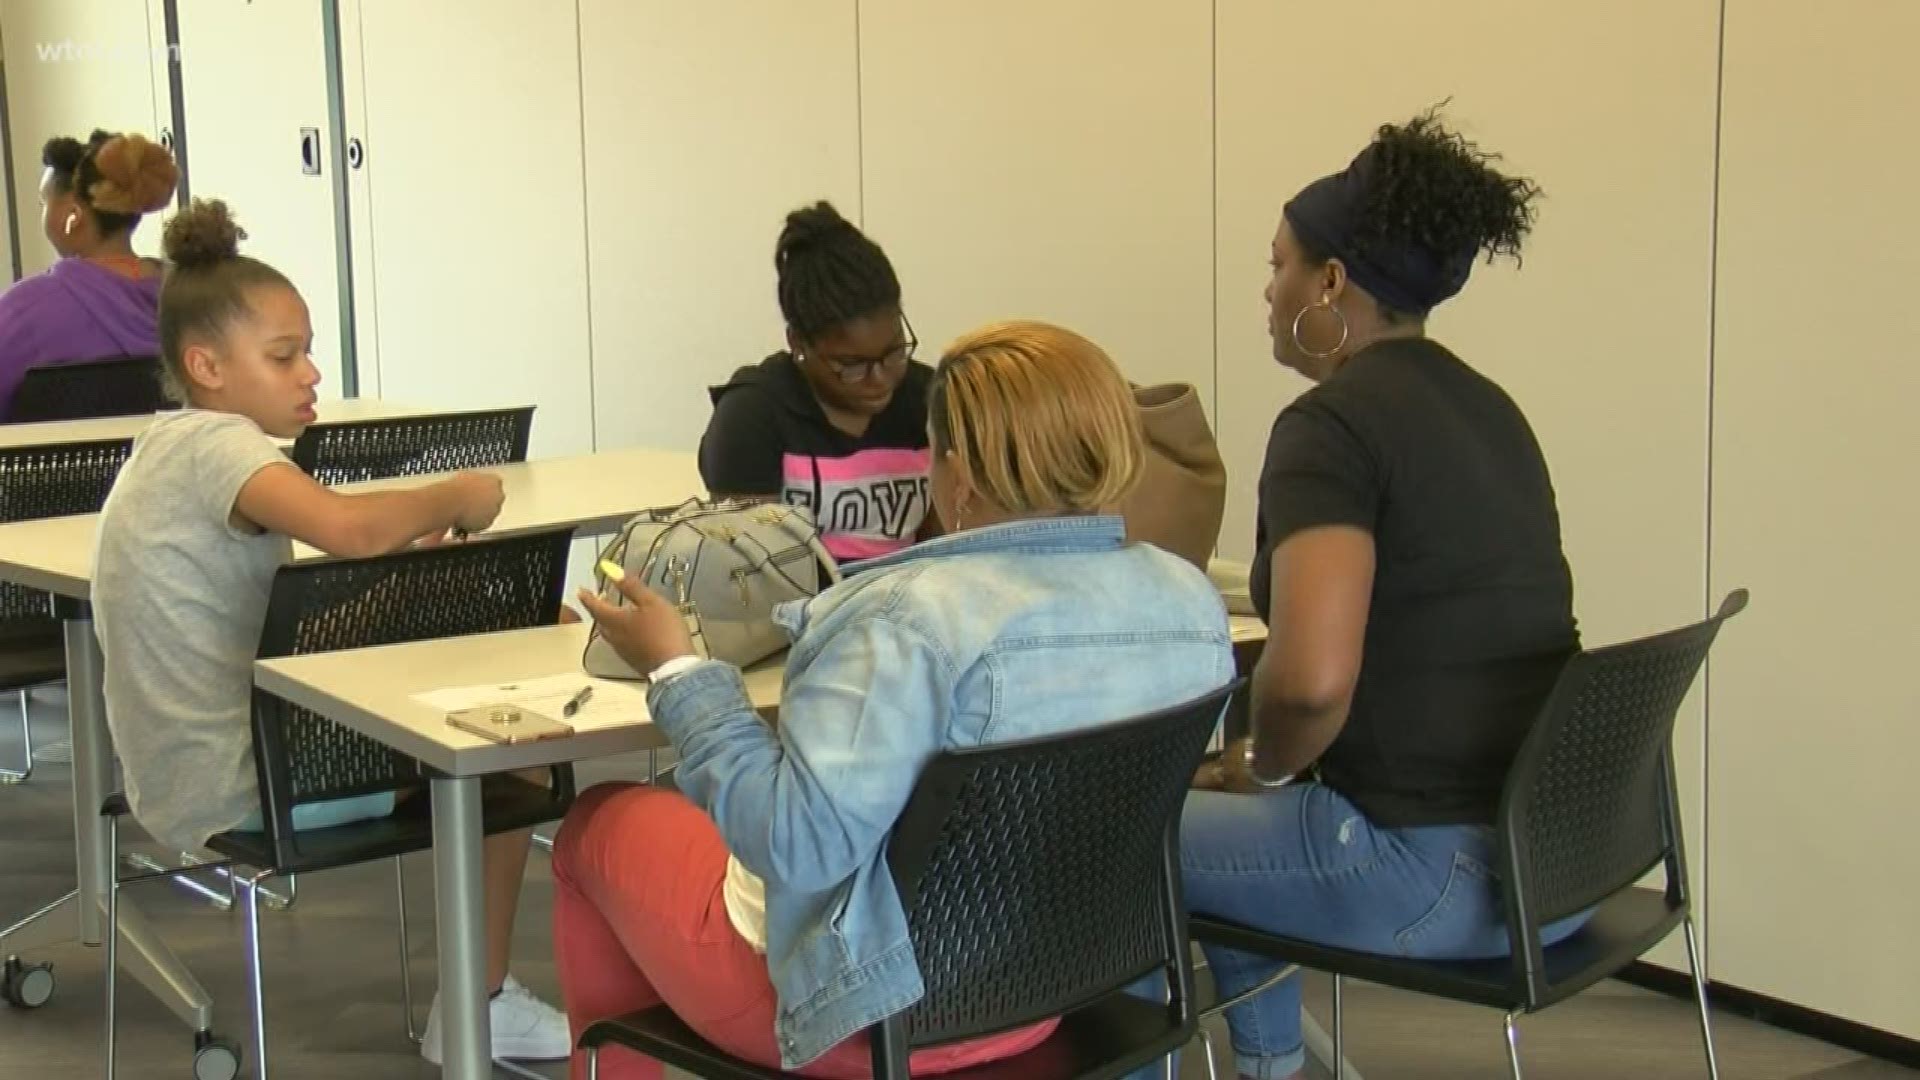 TPD Officer Kimberly Darrington is starting a mentoring program to work with young women in Central Toledo.